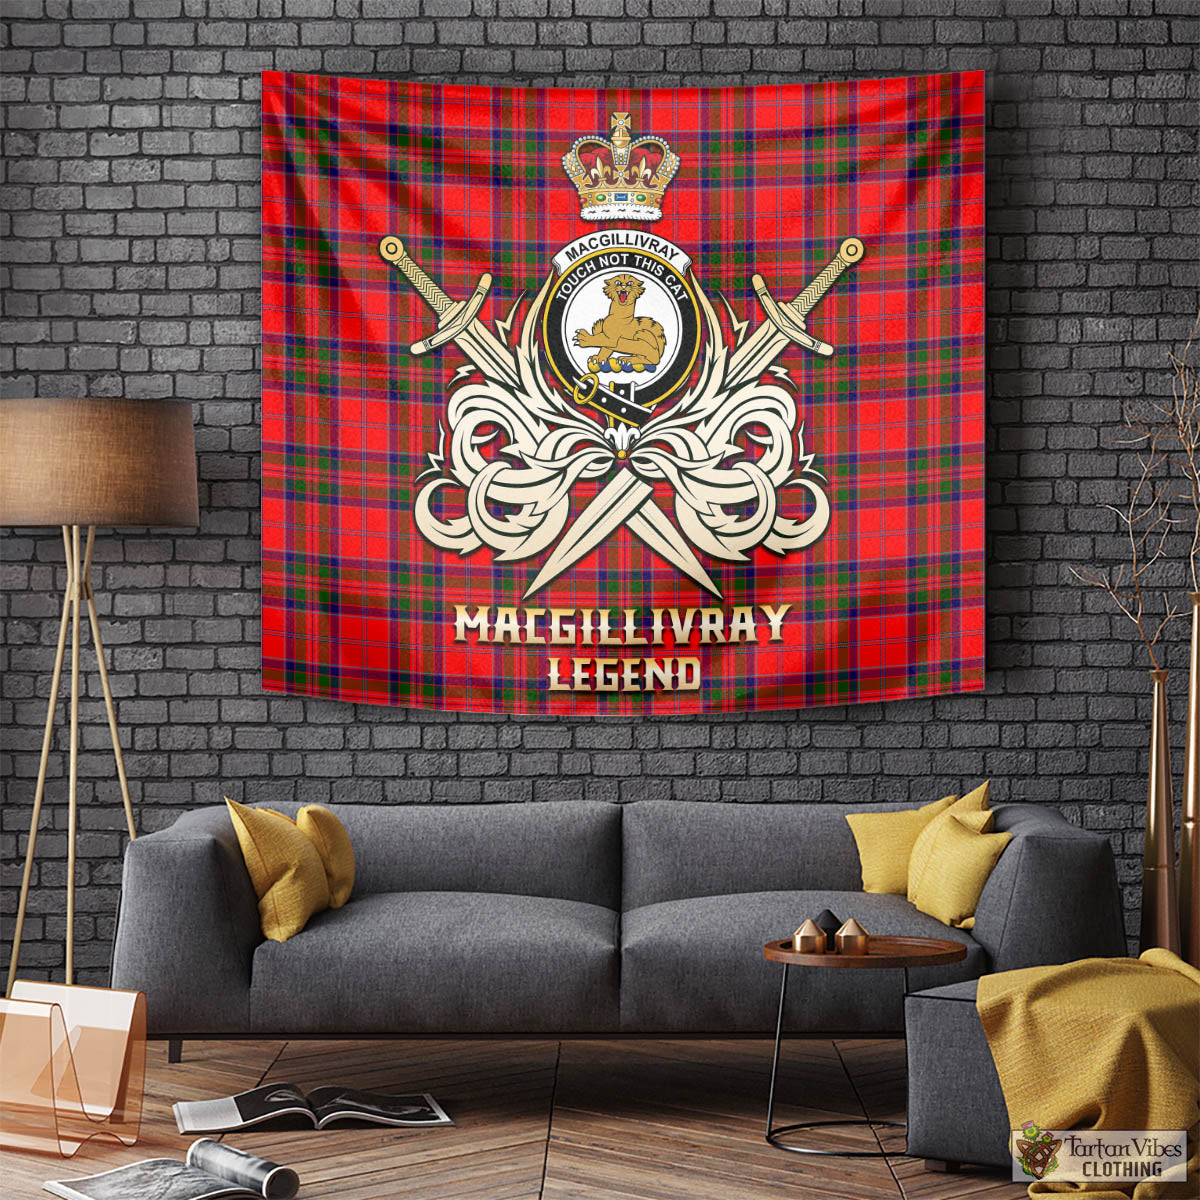 Tartan Vibes Clothing MacGillivray Modern Tartan Tapestry with Clan Crest and the Golden Sword of Courageous Legacy